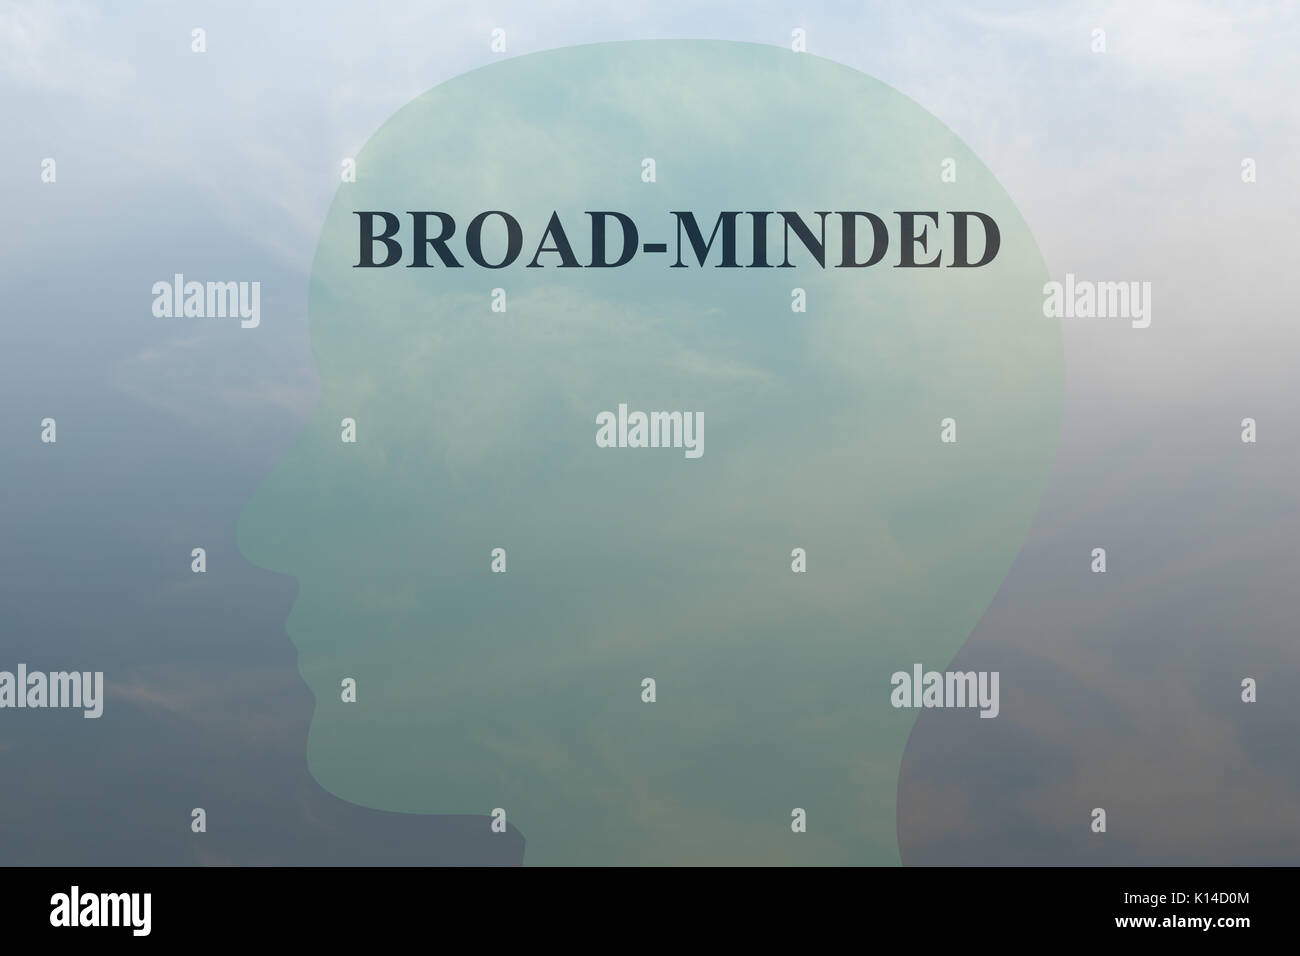 Render illustration of 'BROAD-MINDED' script on head silhouette, with cloudy sky as a background. Stock Photo